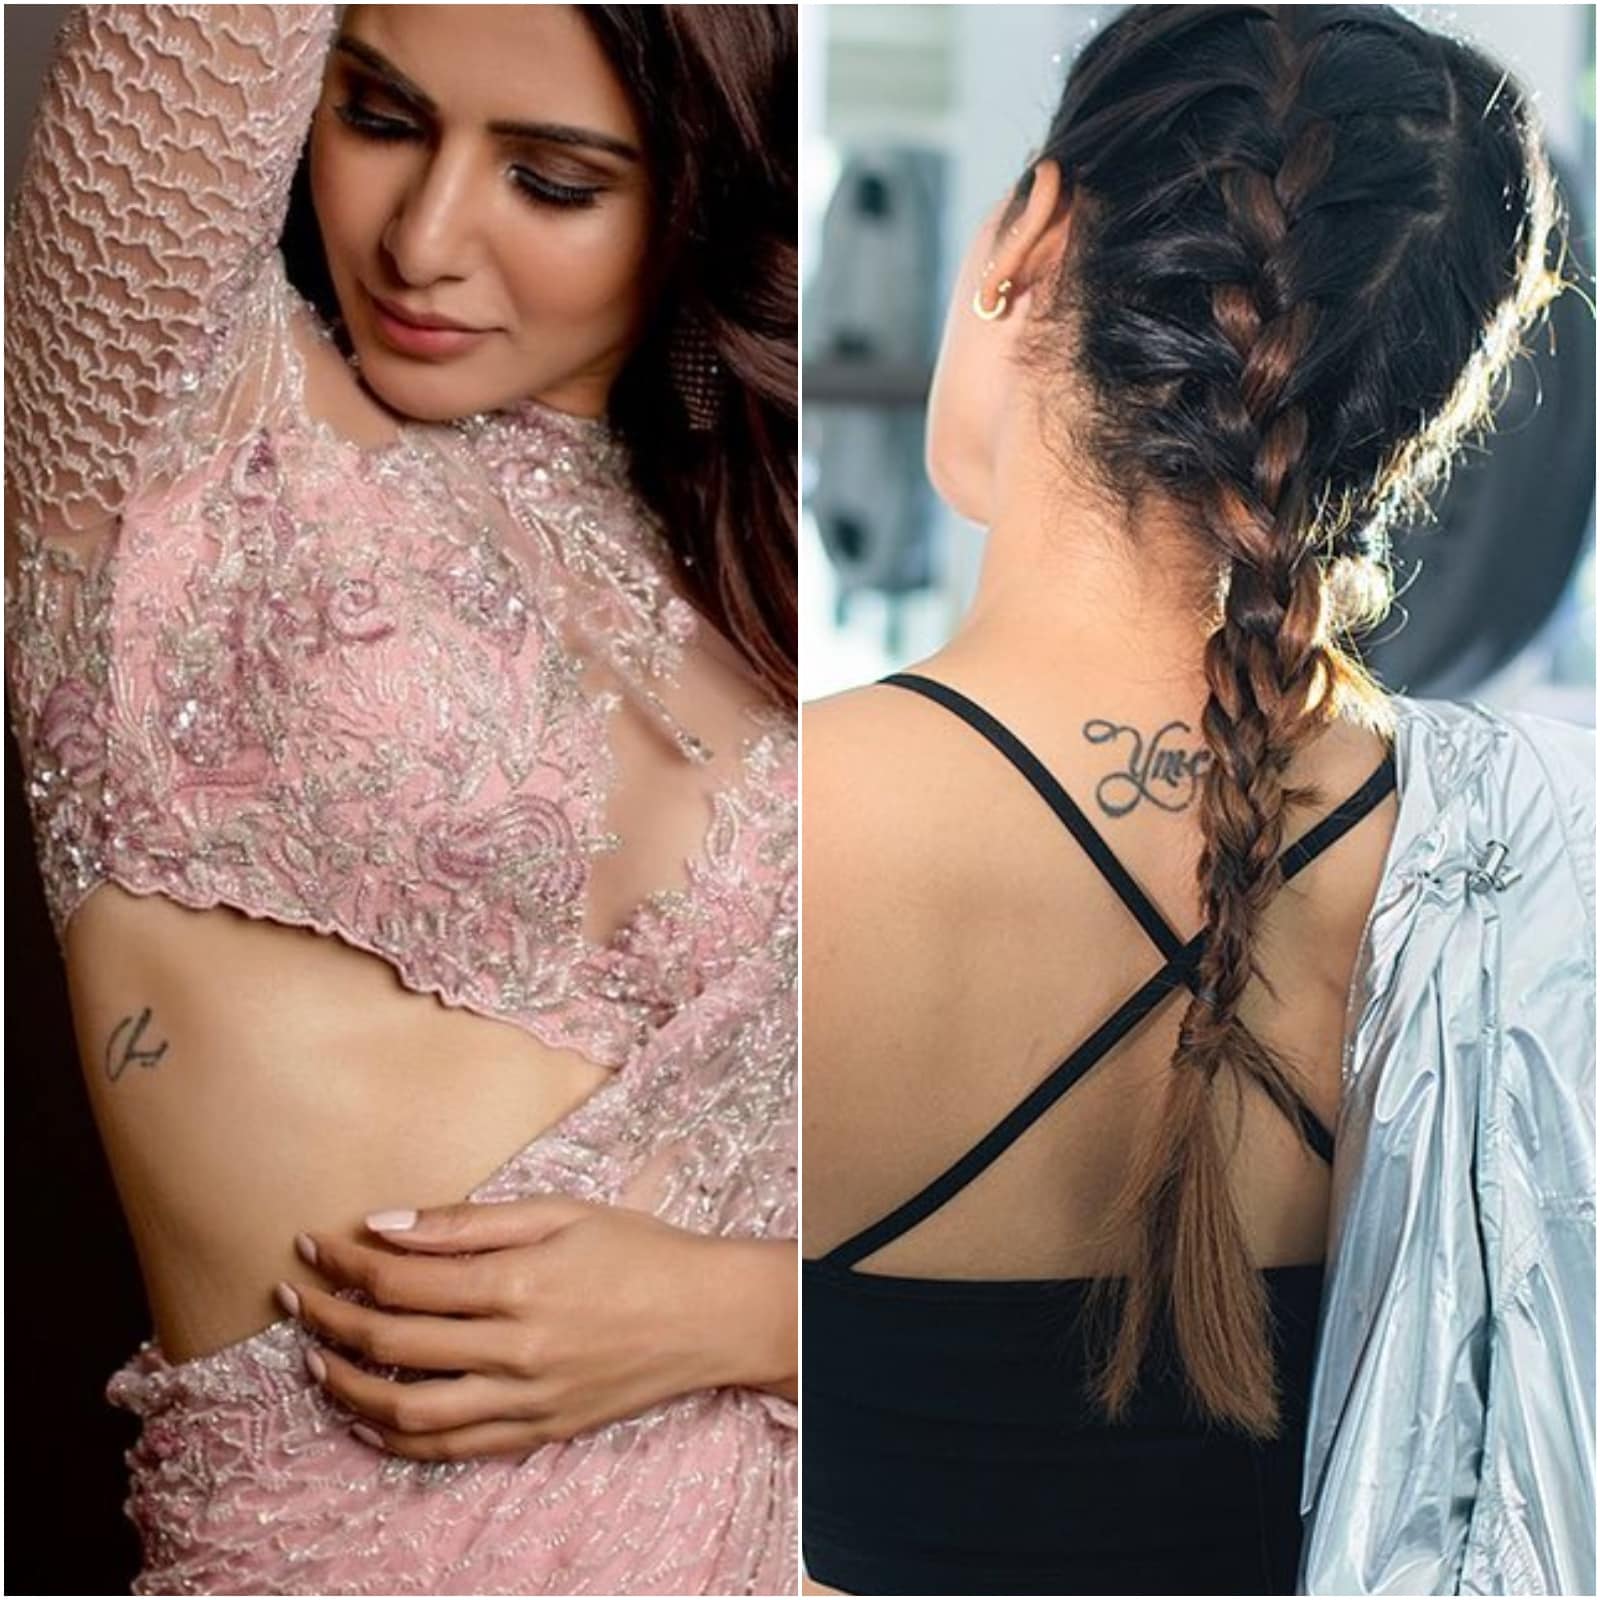 Find out how Samantha Akkineni’s 3 tattoos are connected to Naga Chaitanya